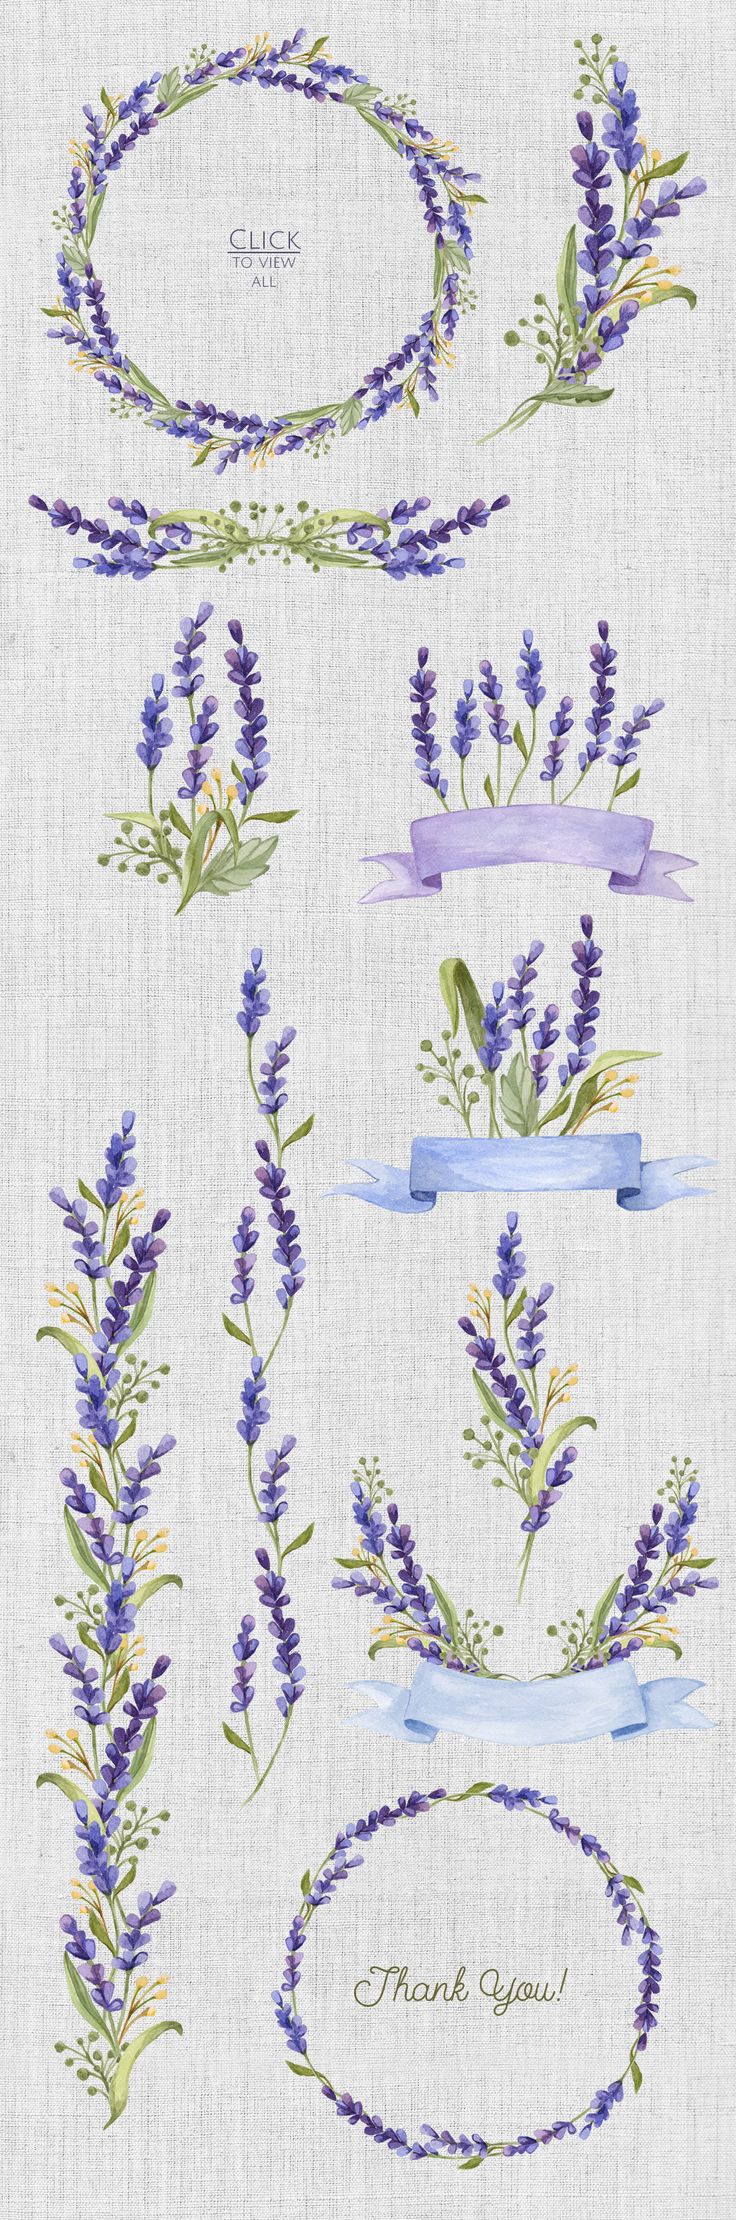 Watercolor set with Lavender Flowers by NataliVA on Creative Market